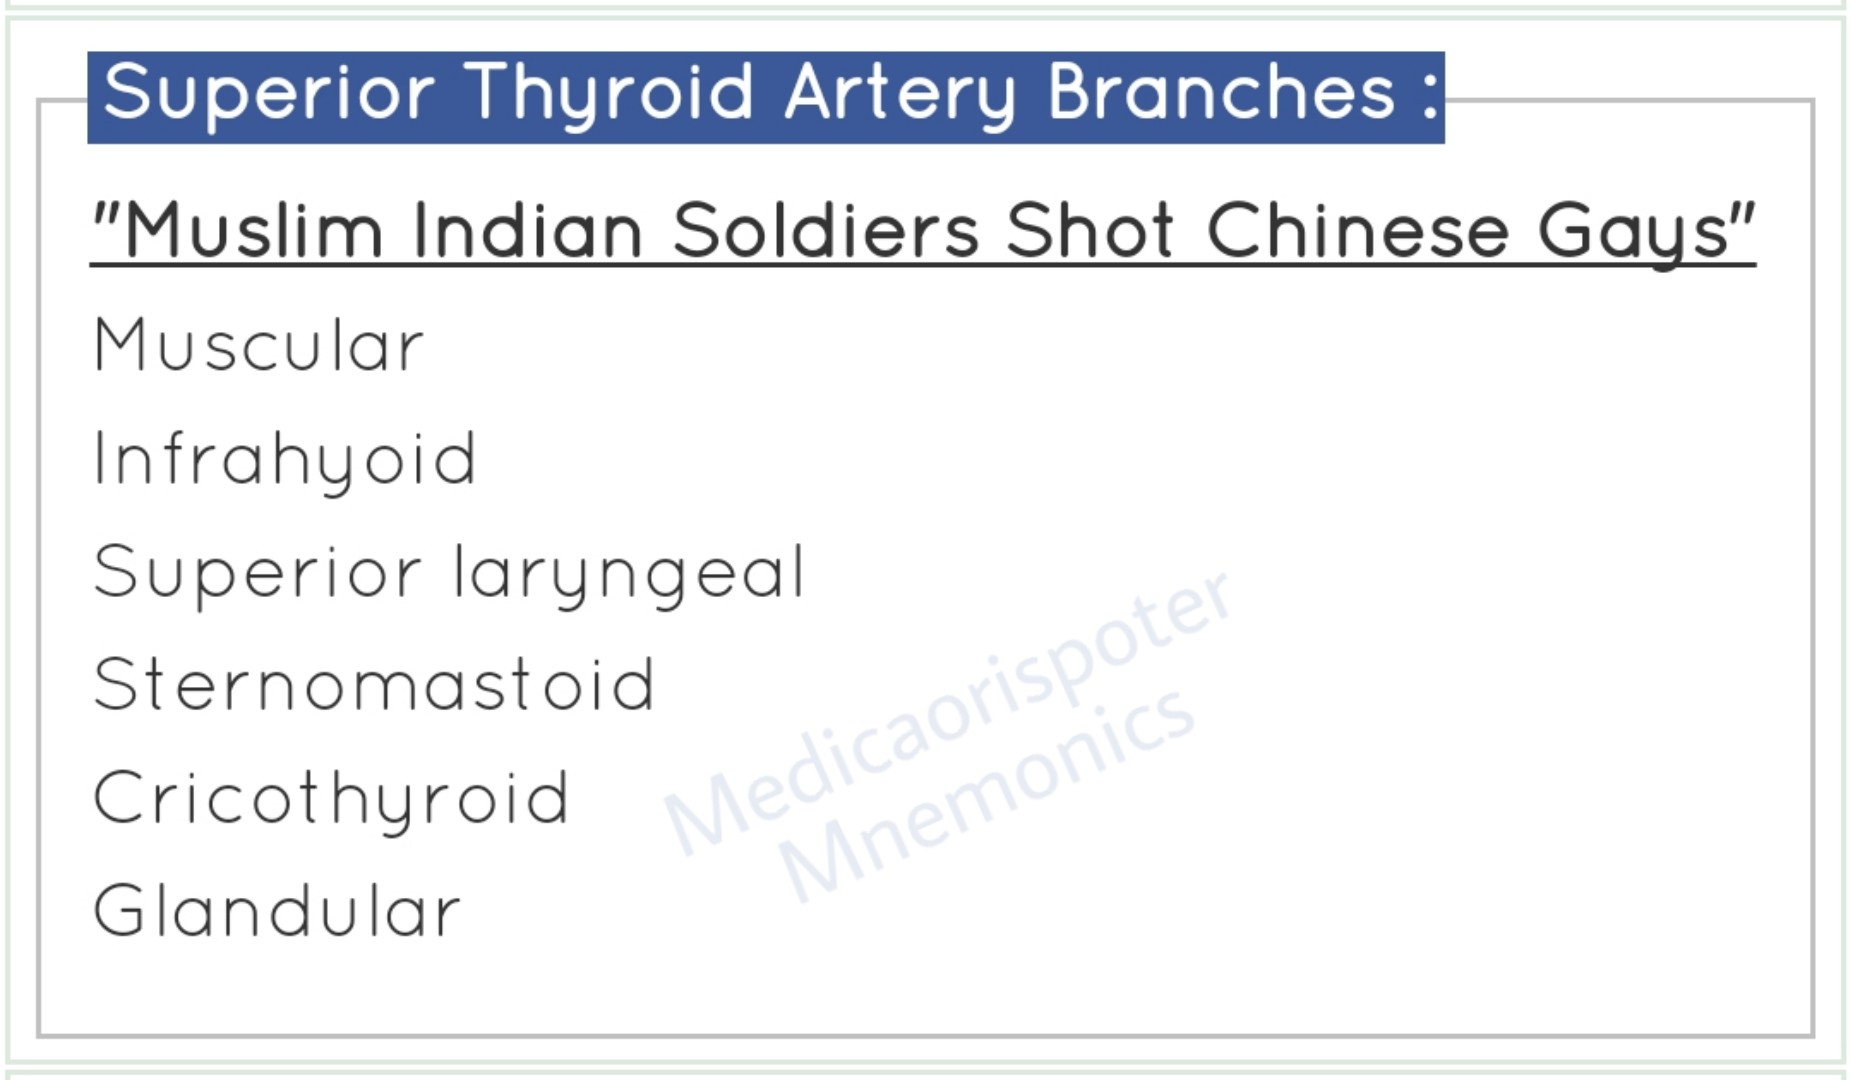 Branches_of_Superior_Thyroid_Artery